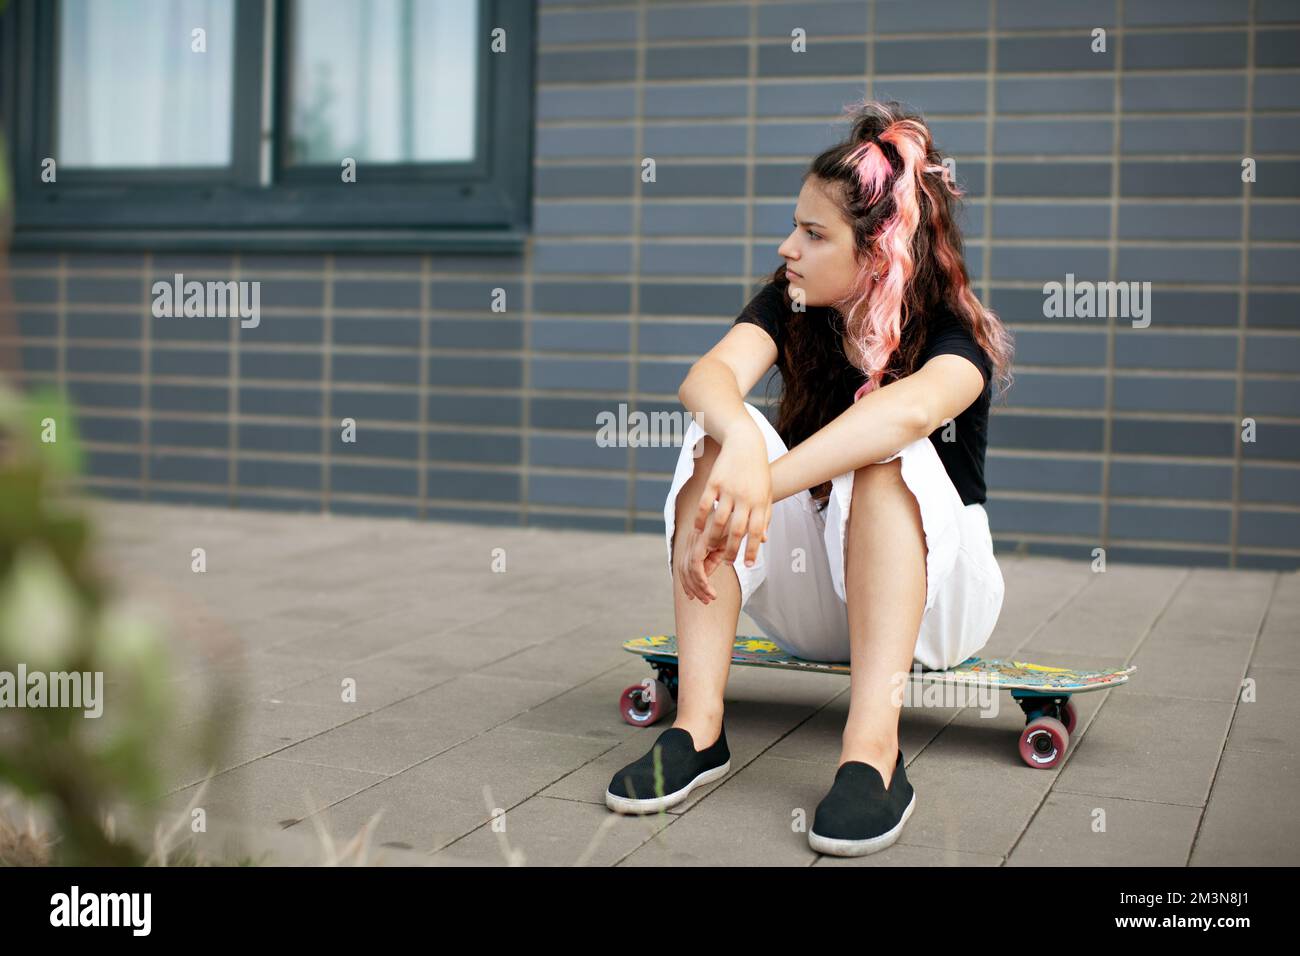 Teenager girl sits on skateboard. Hipster Teen model skateboarder with long pink hair on gray background Stock Photo